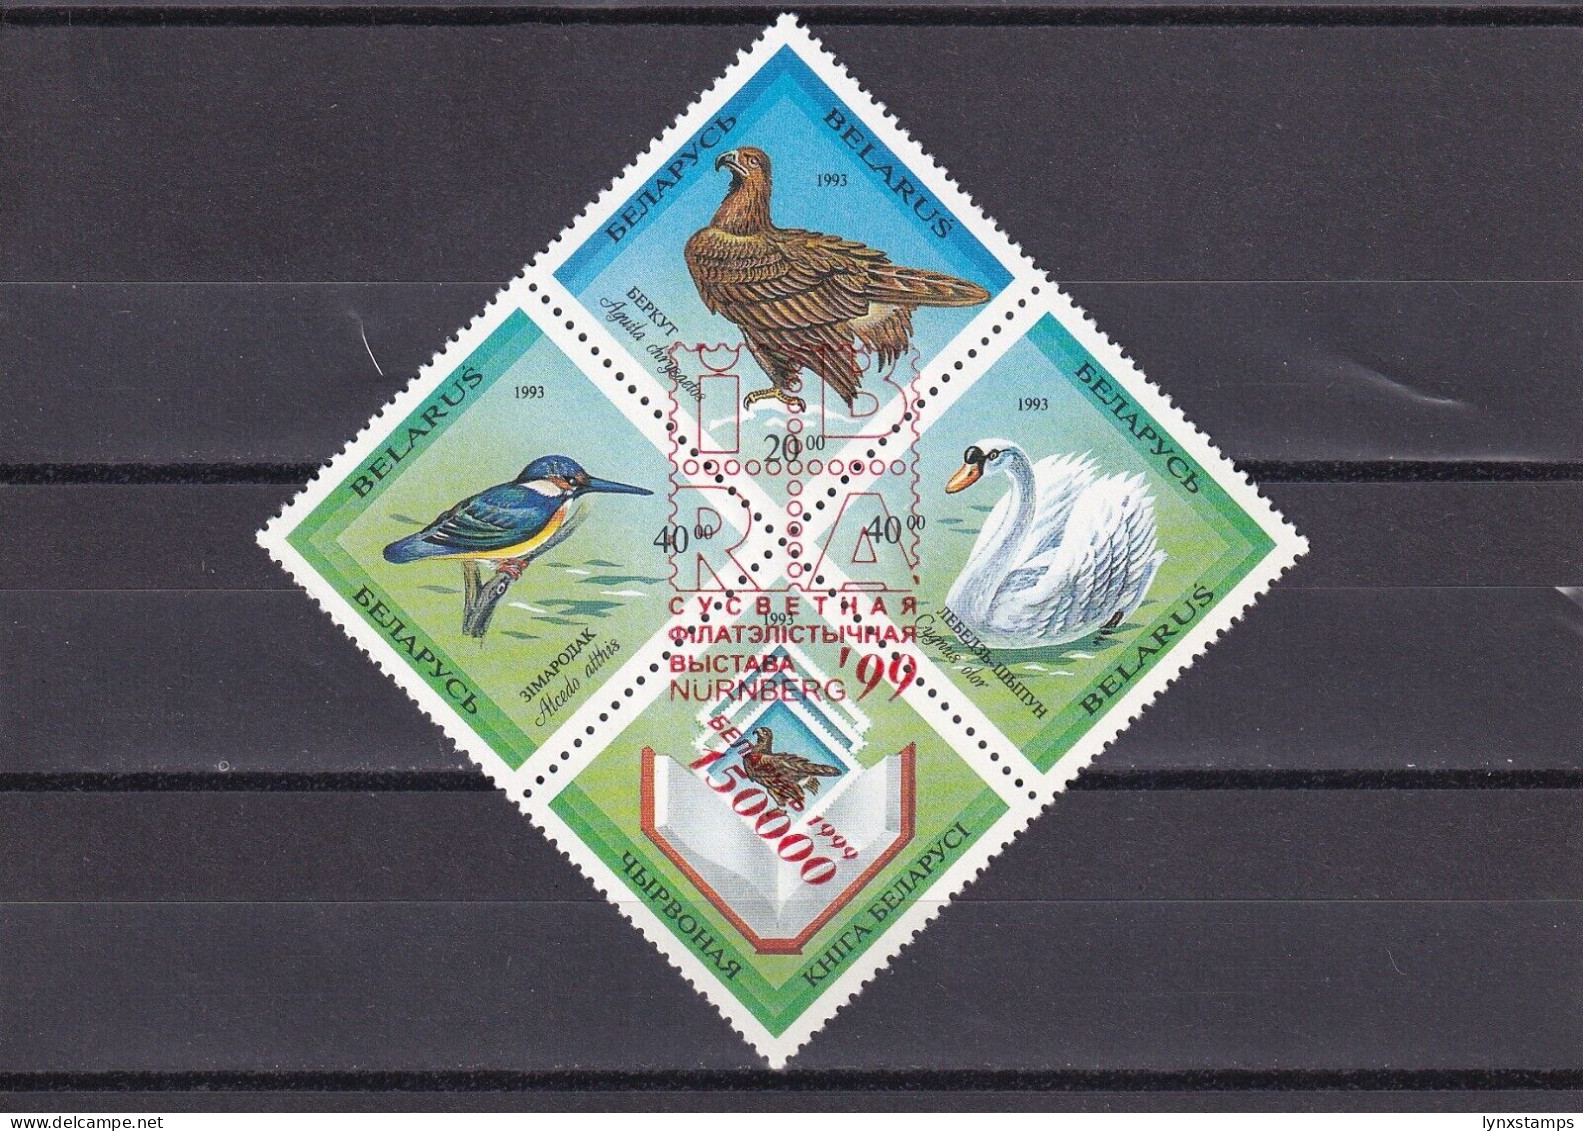 SA06 Belarus 1999 Exhibition IBRA '99 Birds Surcharged And Overpinted Mint Block - Bielorrusia